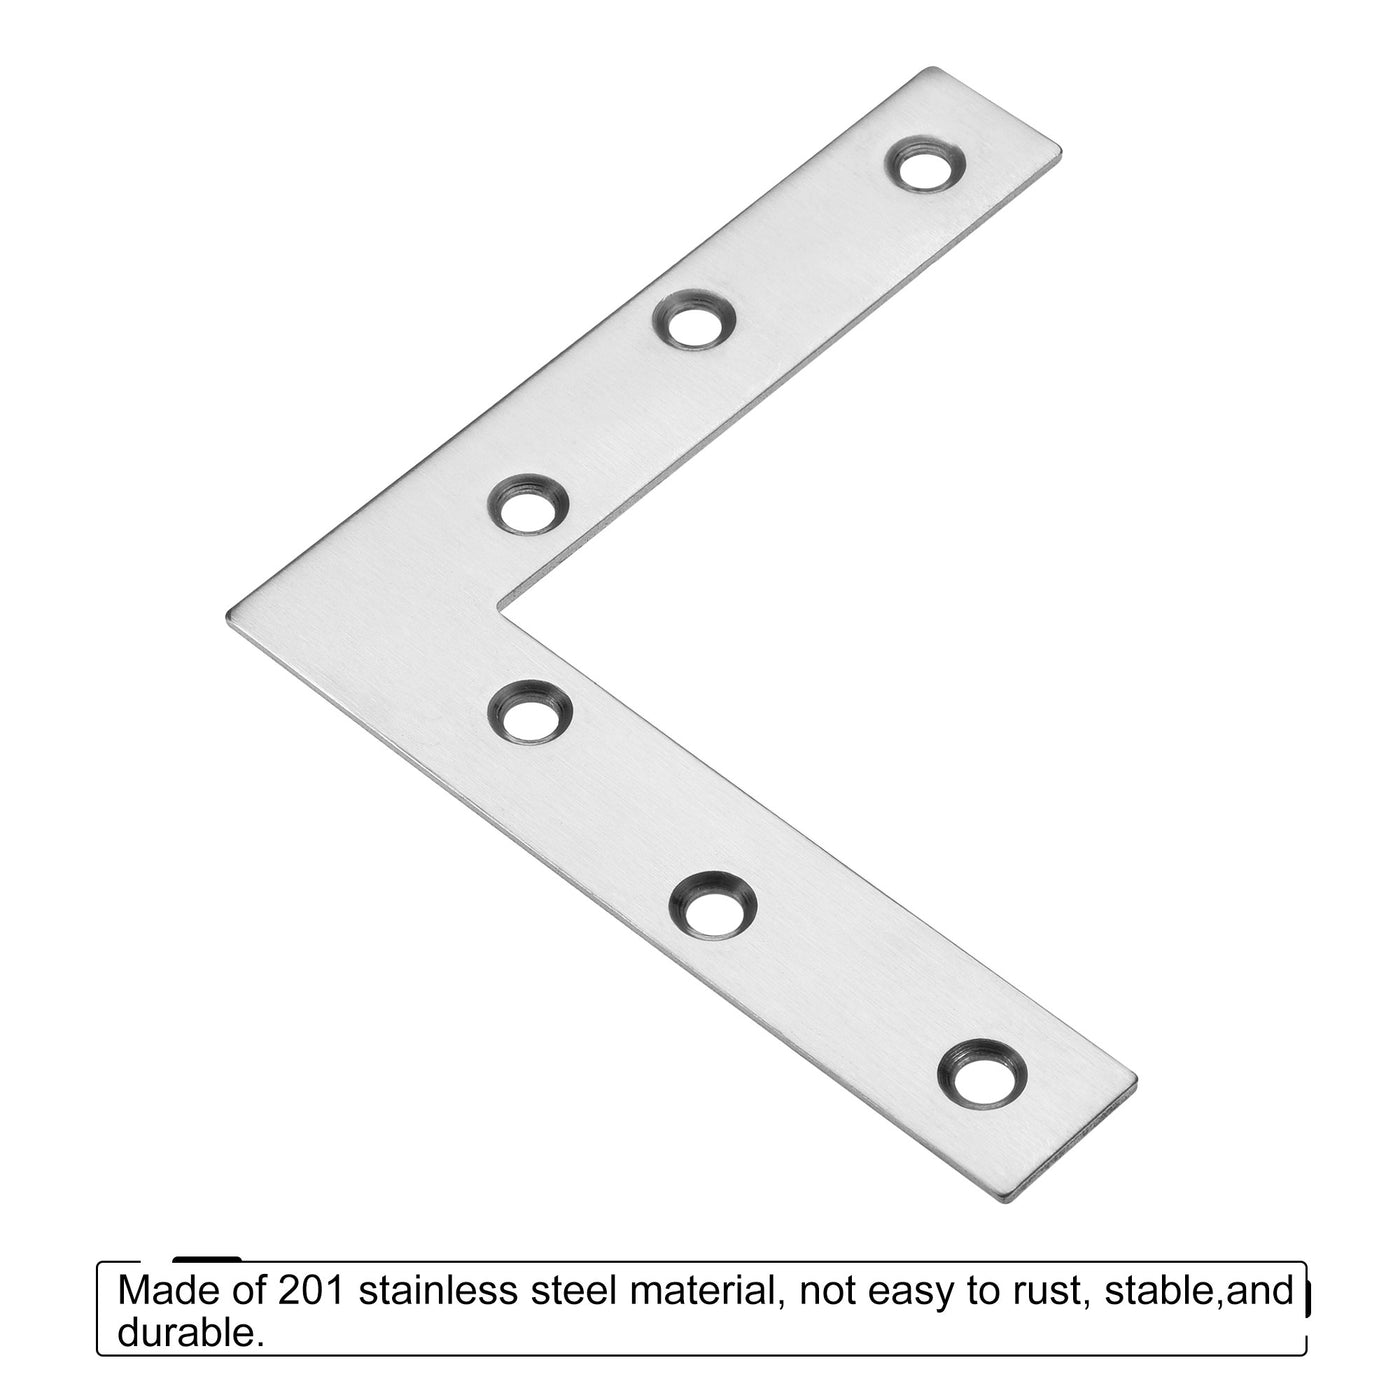 uxcell Uxcell L Shape Brace 120x120x2mm Stainless Steel Mending Repairing Flat Brackets for Joint Fastener with Screws 4Pcs